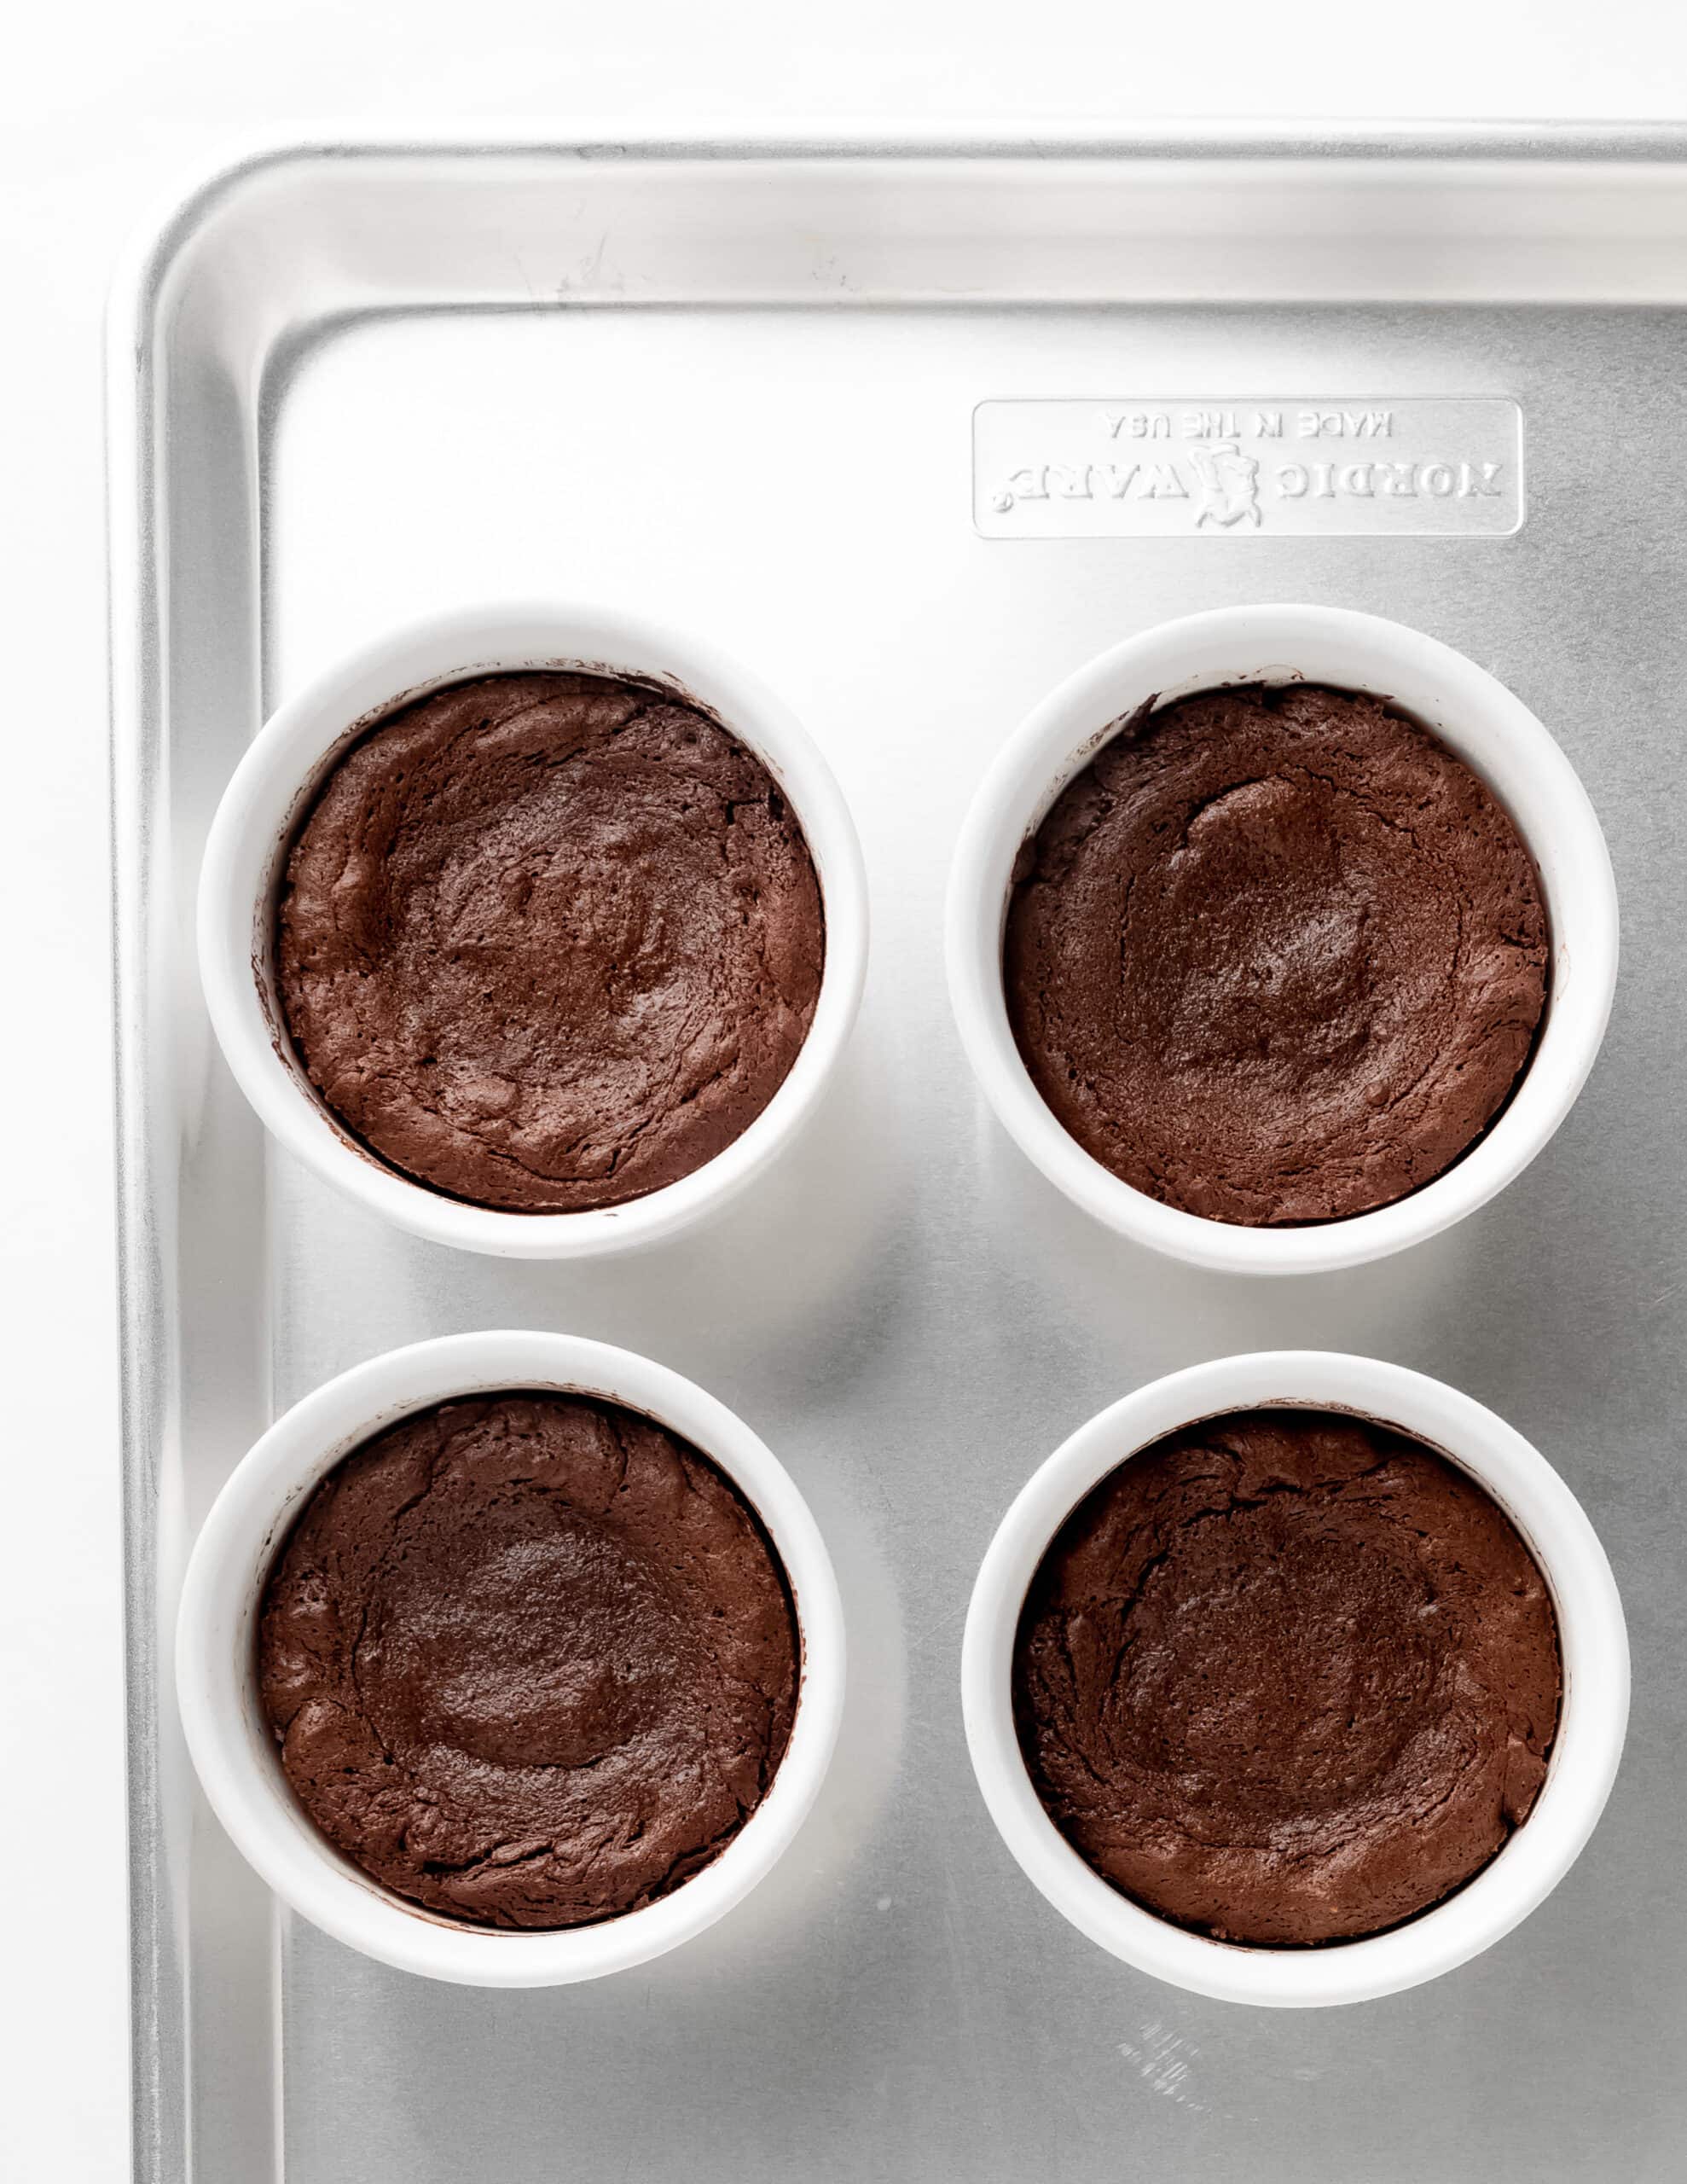 A metal tray with four fully baked molten lava cakes in white ceramic ramekins.